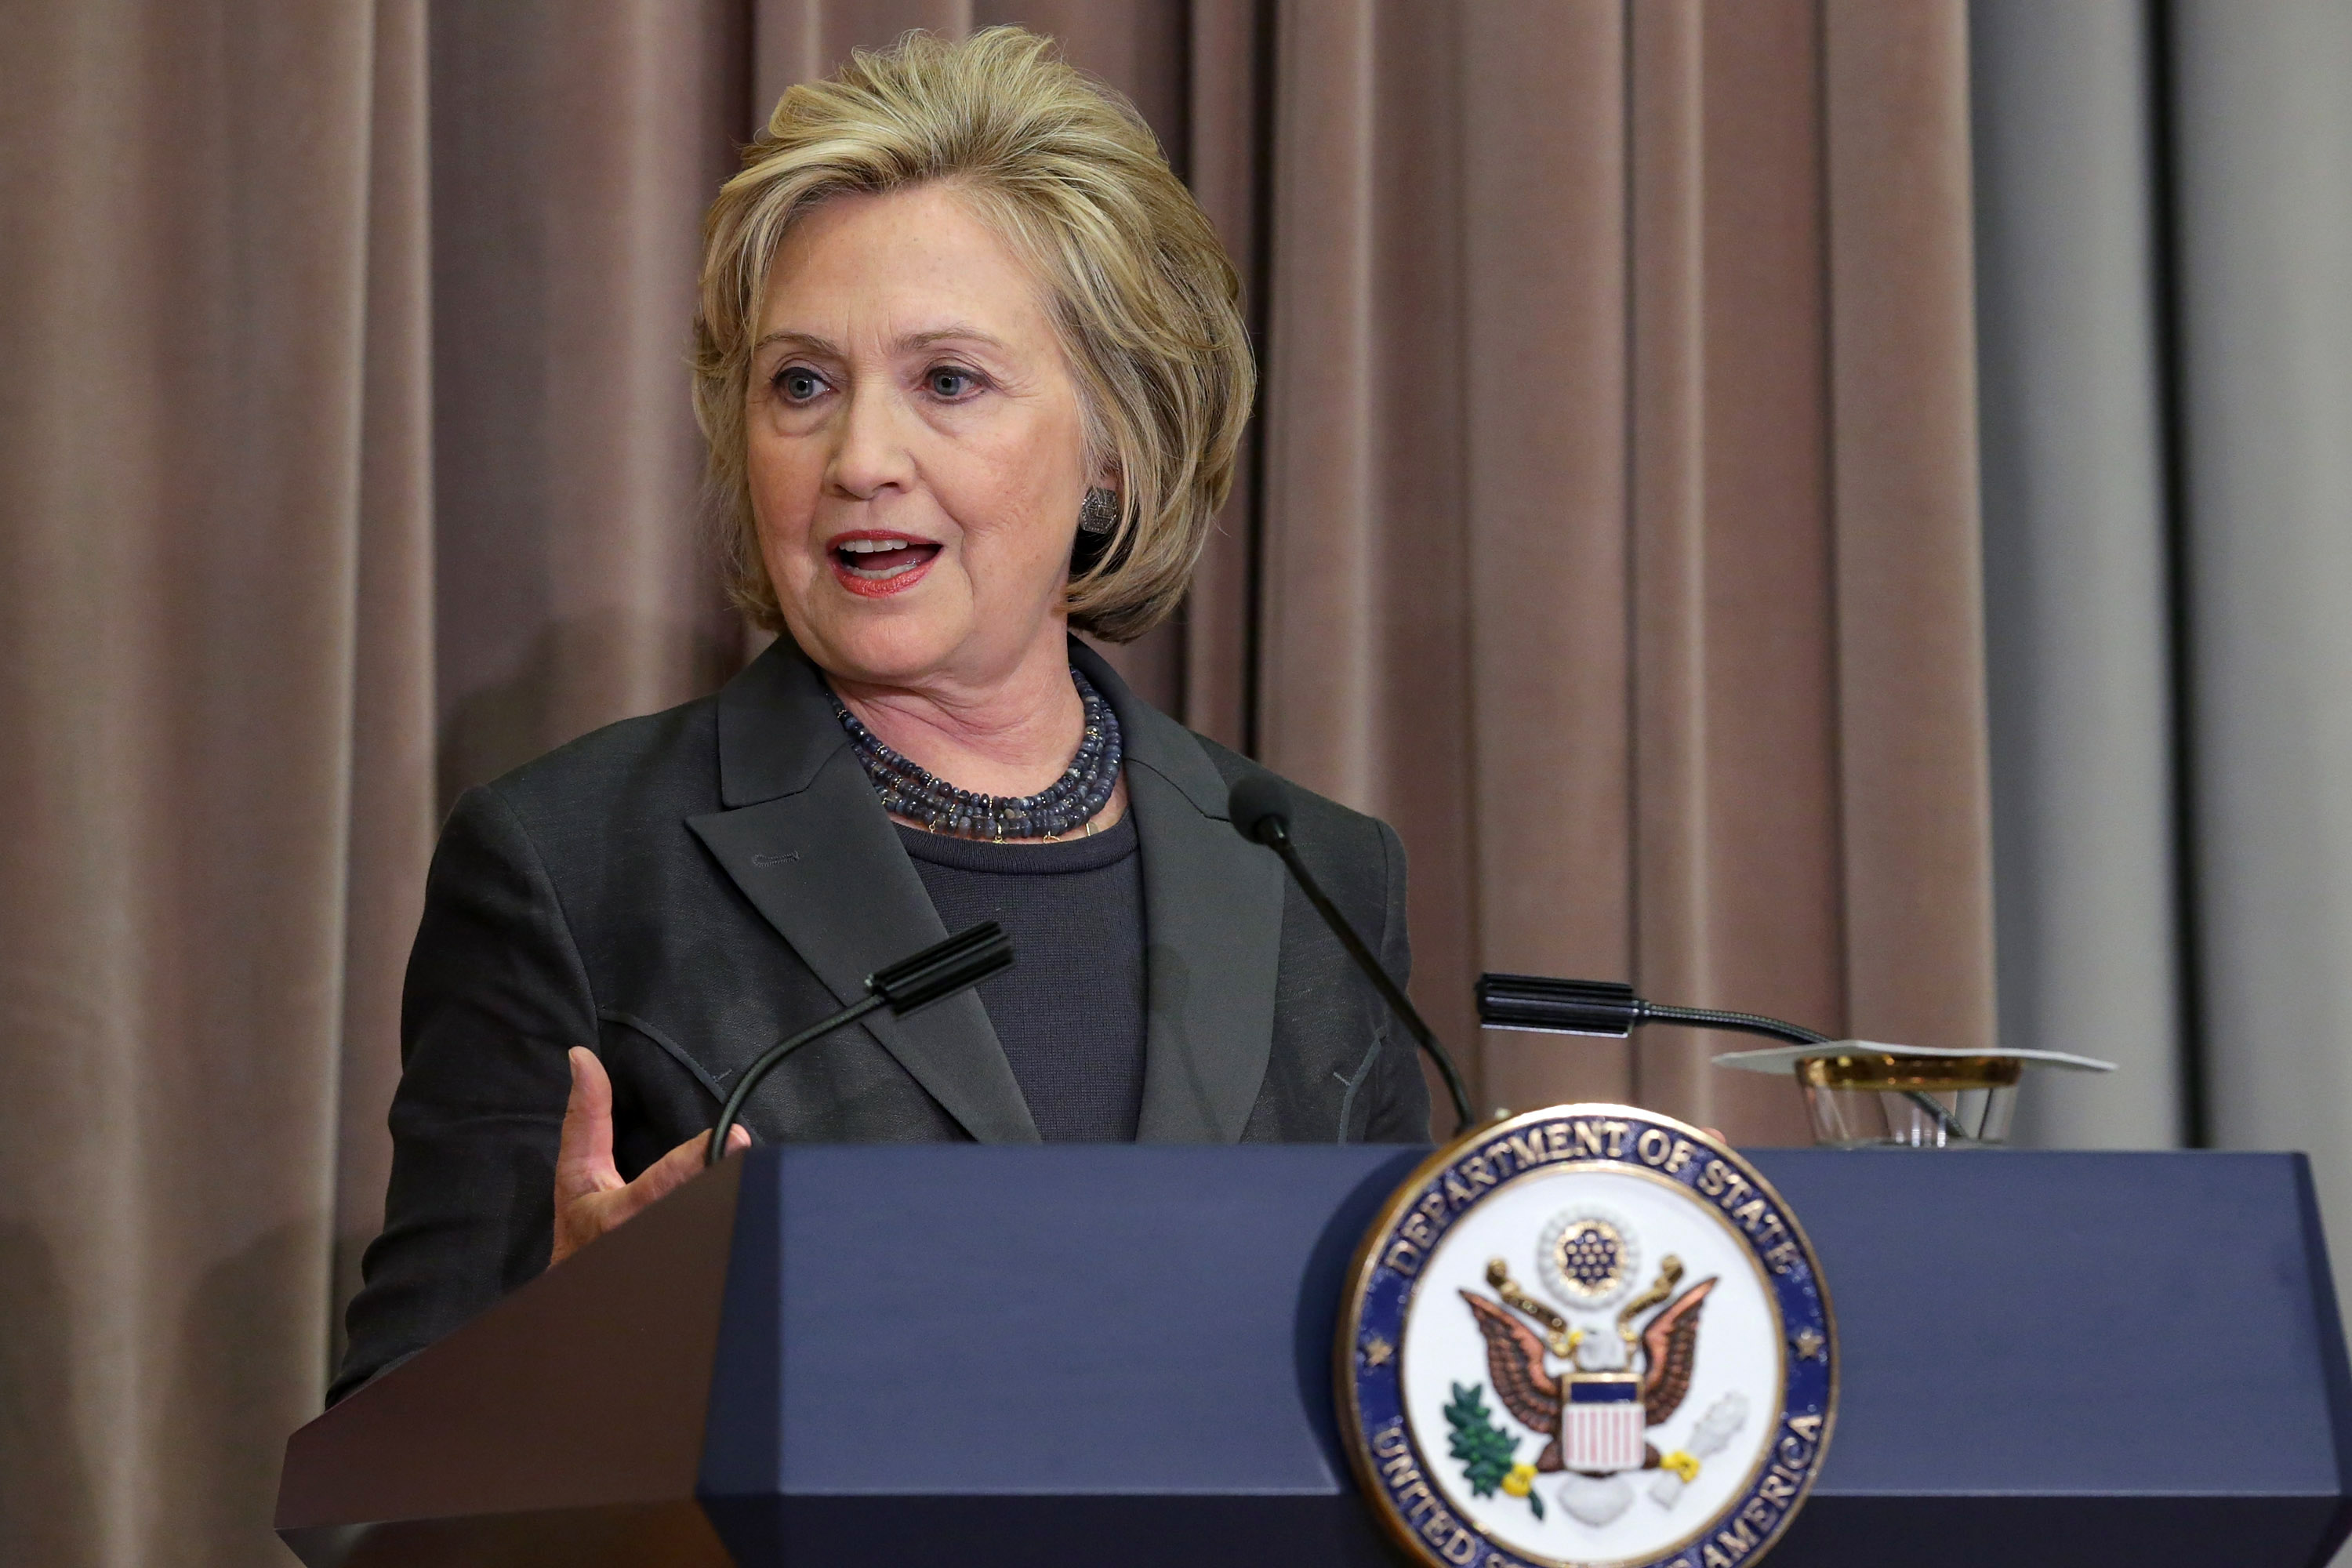 Former Secretary of State Hillary Clinton delivers remarks during the ceremonial groundbreaking of the future U.S. Diplomacy Center at the State Department's Harry S. Truman Building September 3, 2014 in Washington, DC. (Chip Somodevilla&mdash;Getty Images)